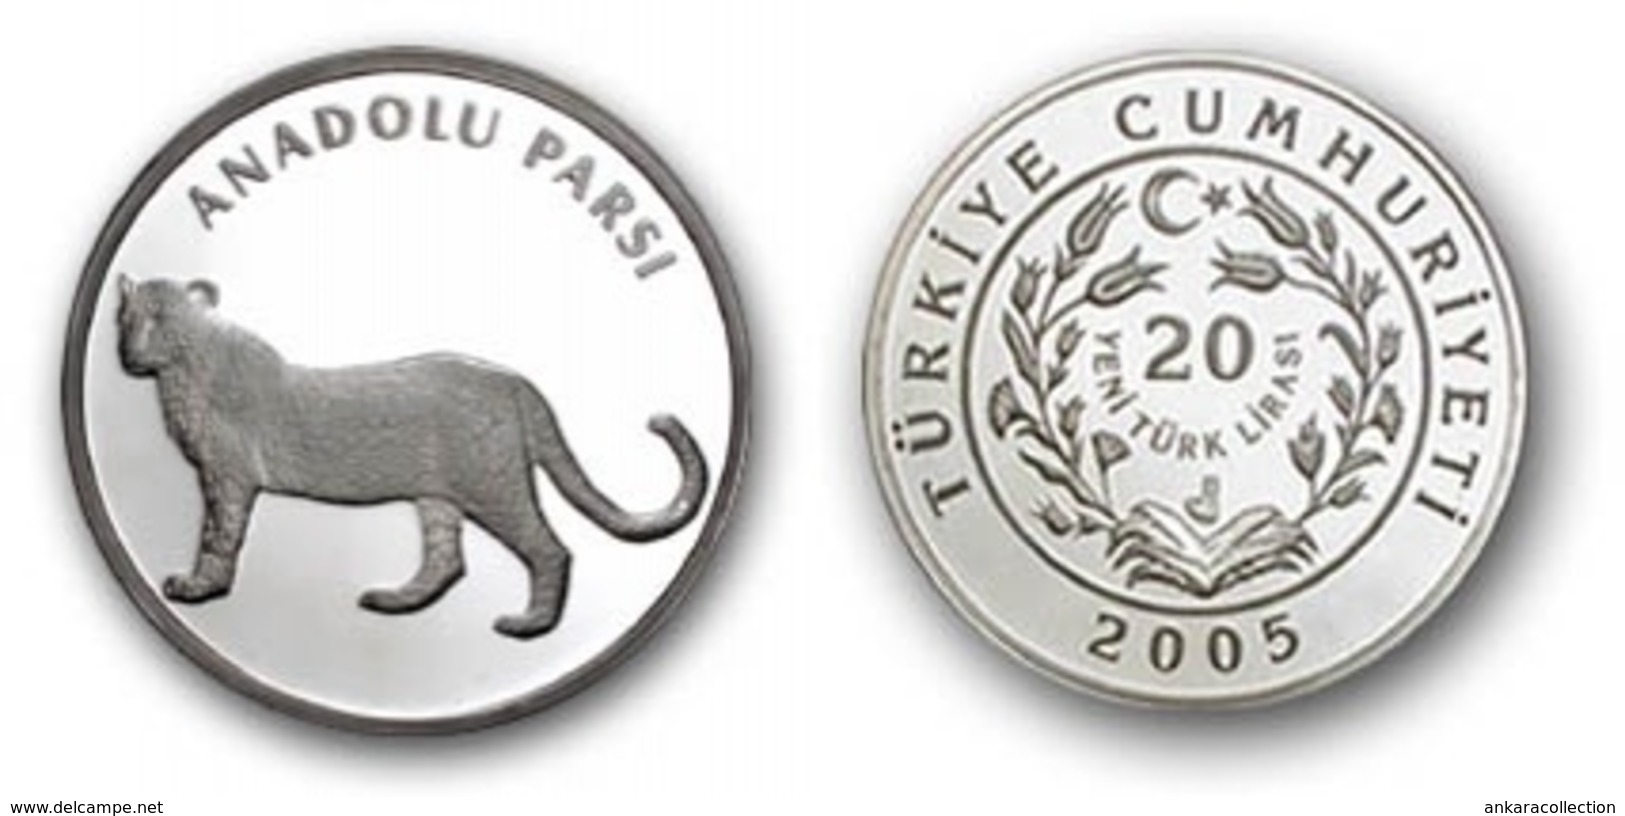 AC - ANATOLIAN LEOPARD ANIMALS OF TURKEY SERIES #1 COMMEMORATIVE SILVER COIN 2005 PROOF UNCIRCULATED - Turkey